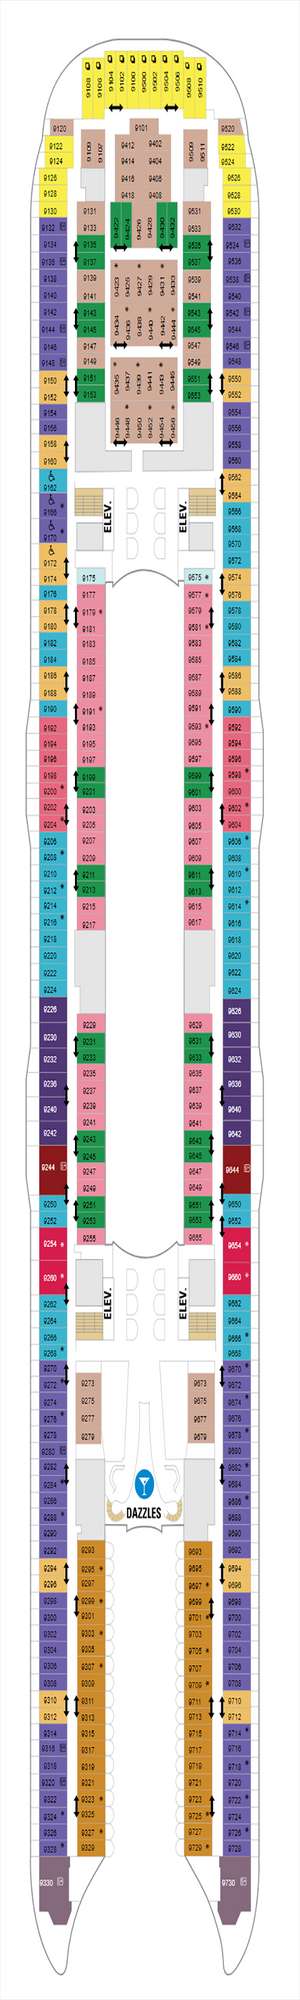 Deck plan for Allure of the Seas